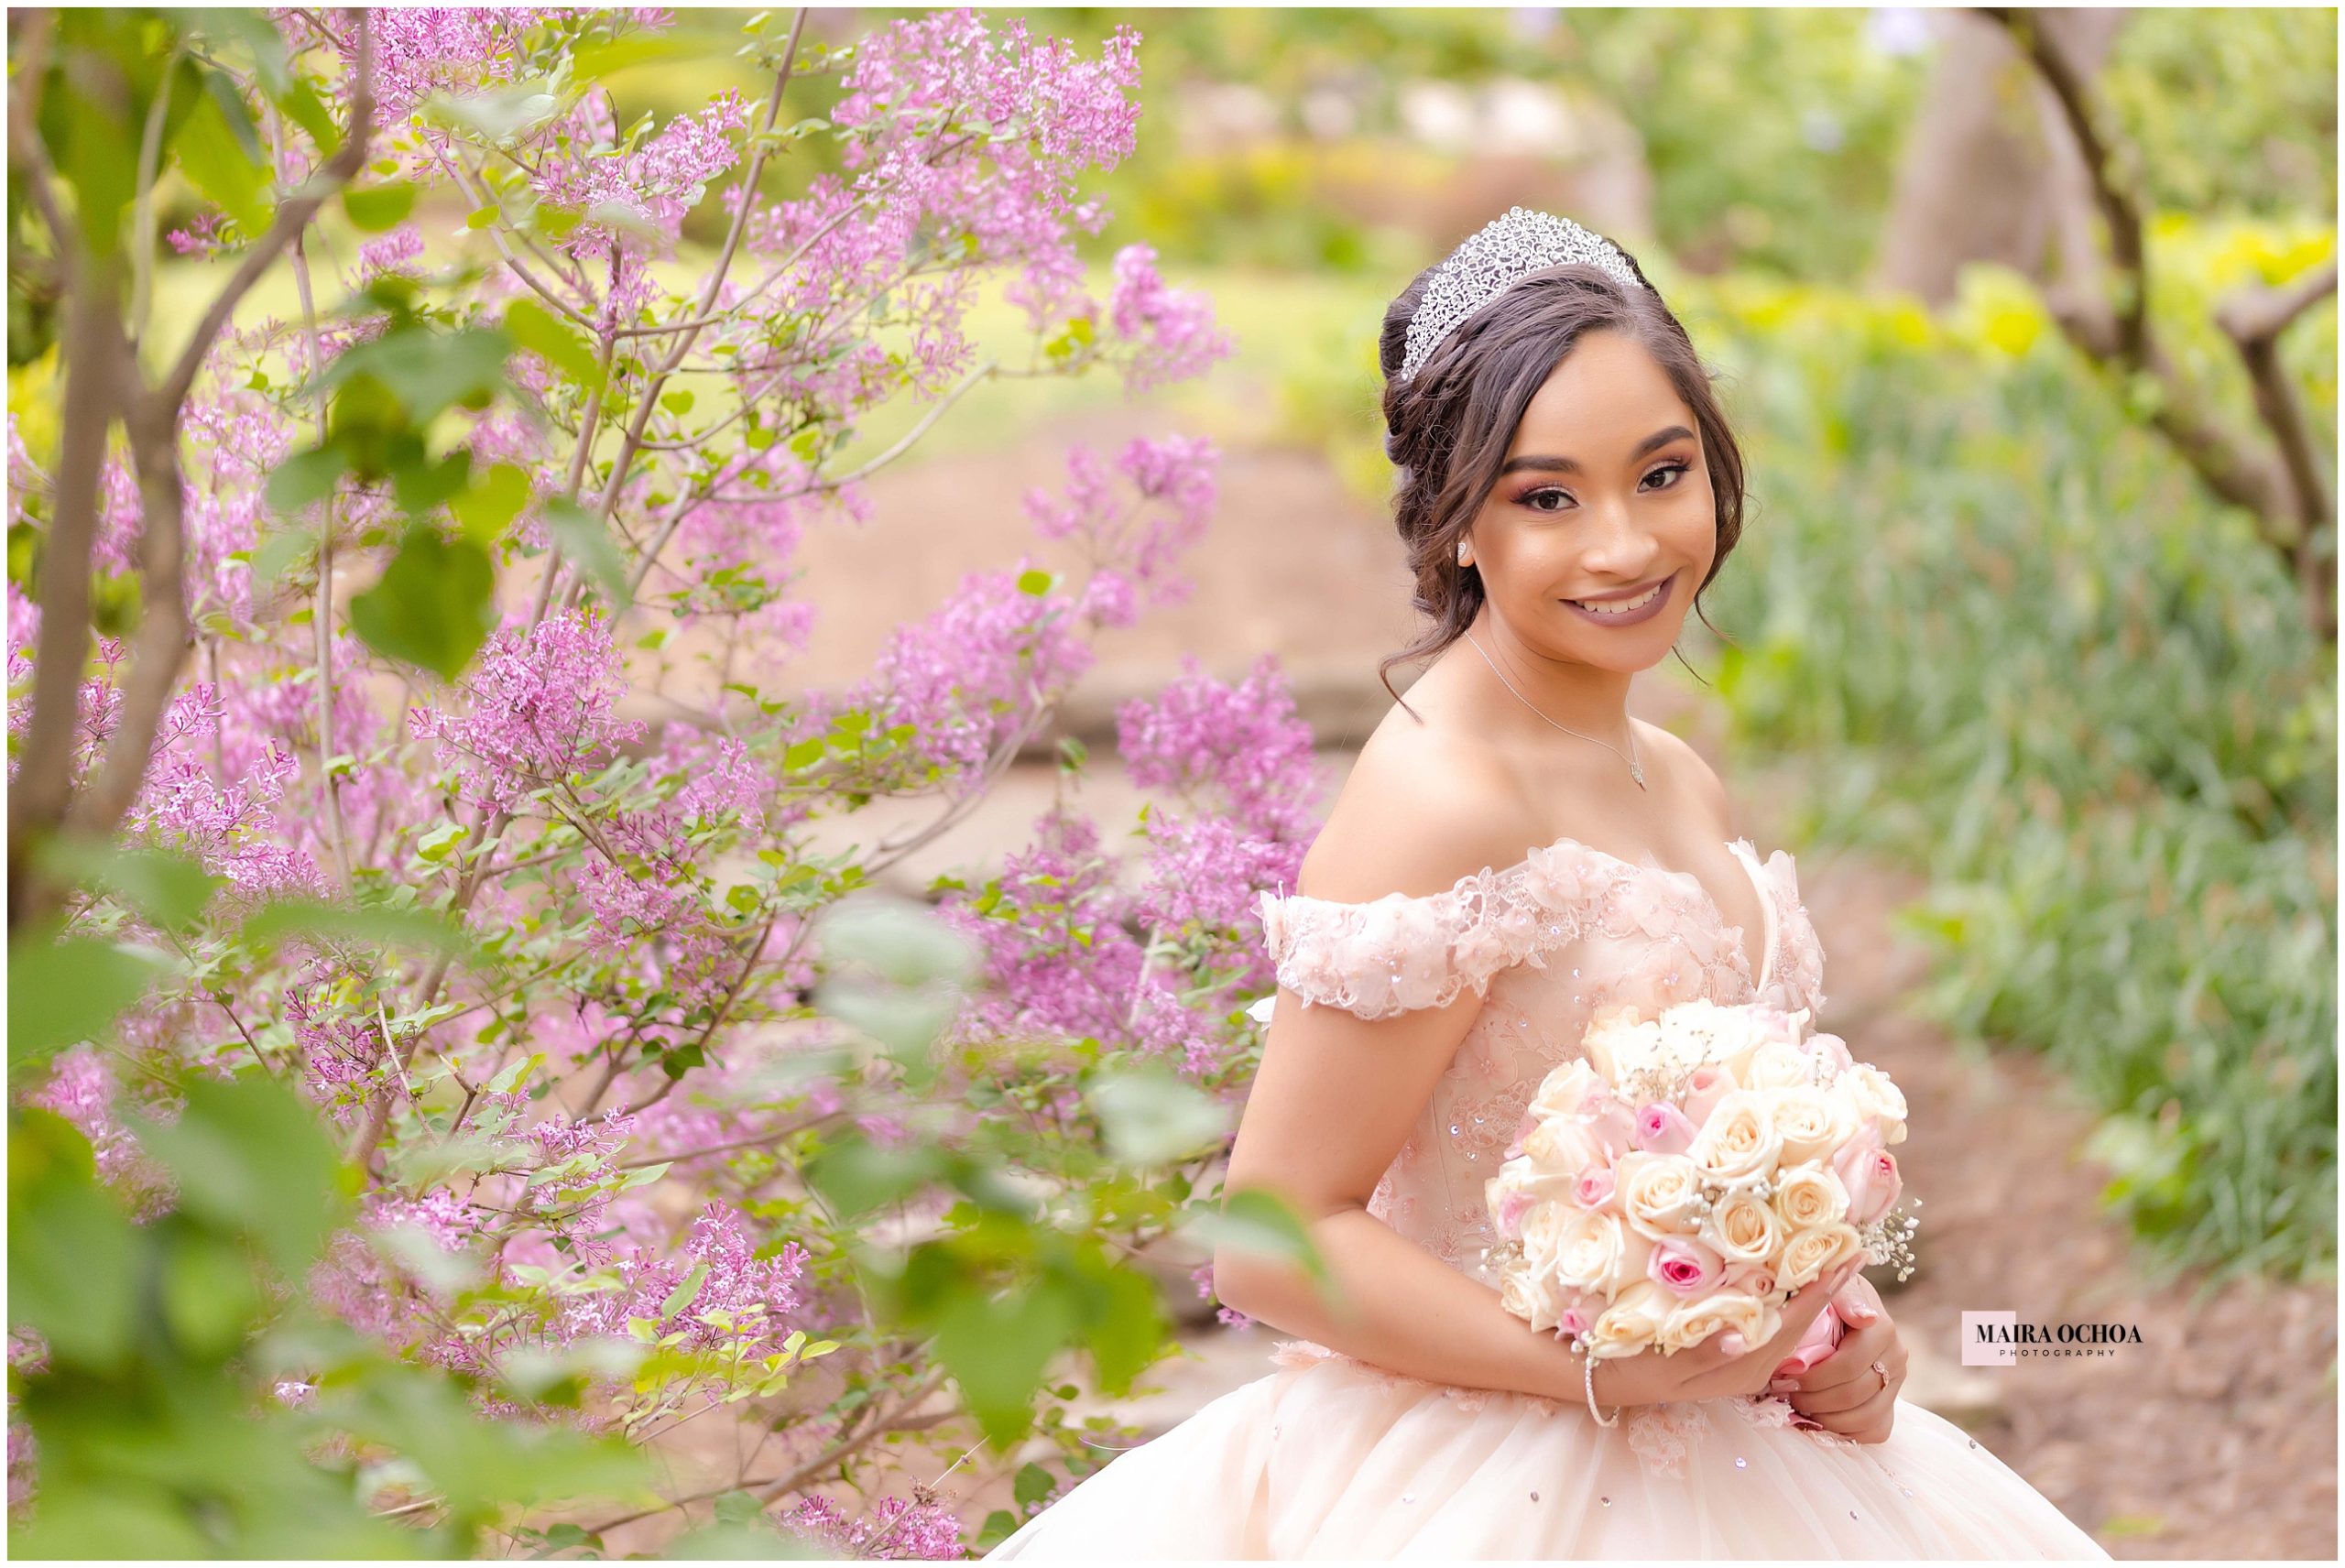 Pink Ball Gown Quinceañera outdoors spring flowers, red tulips